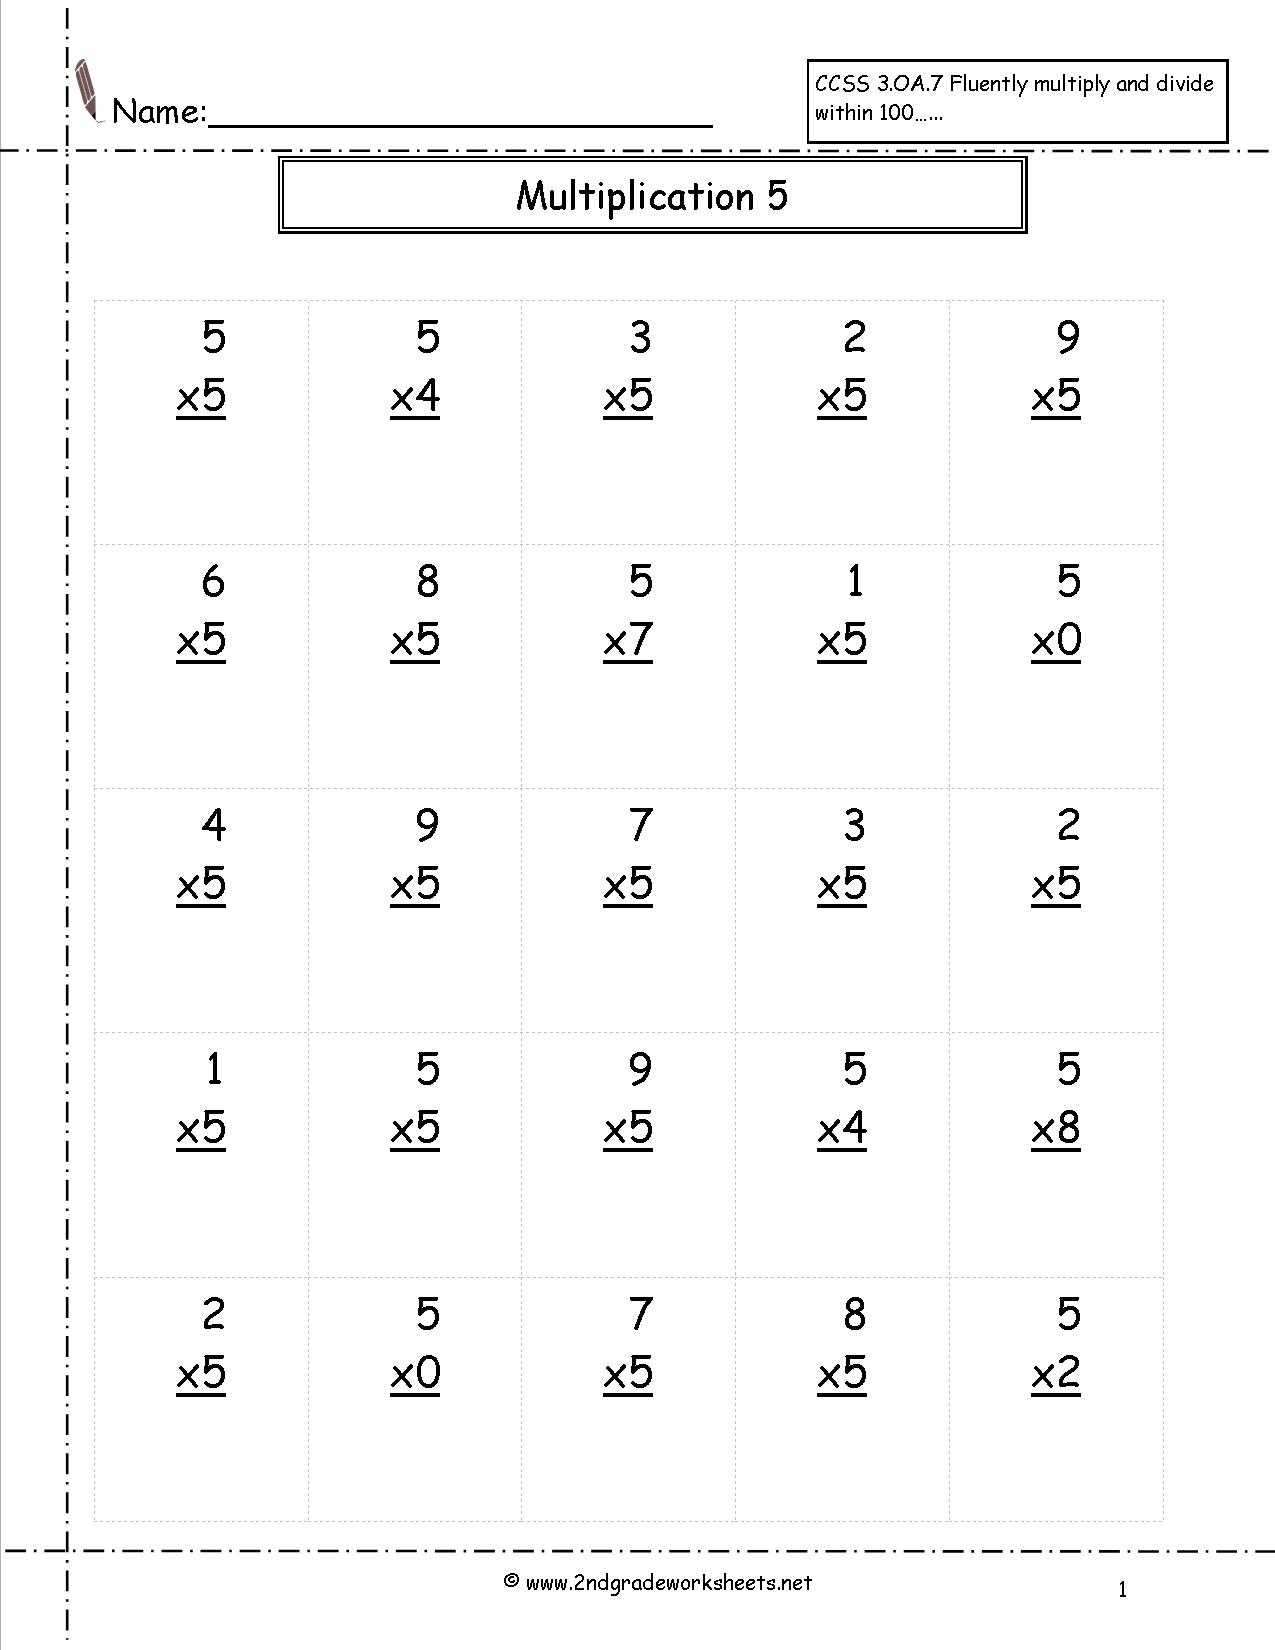 Multiplication Worksheets And Printouts intended for 5 Multiplication Printable